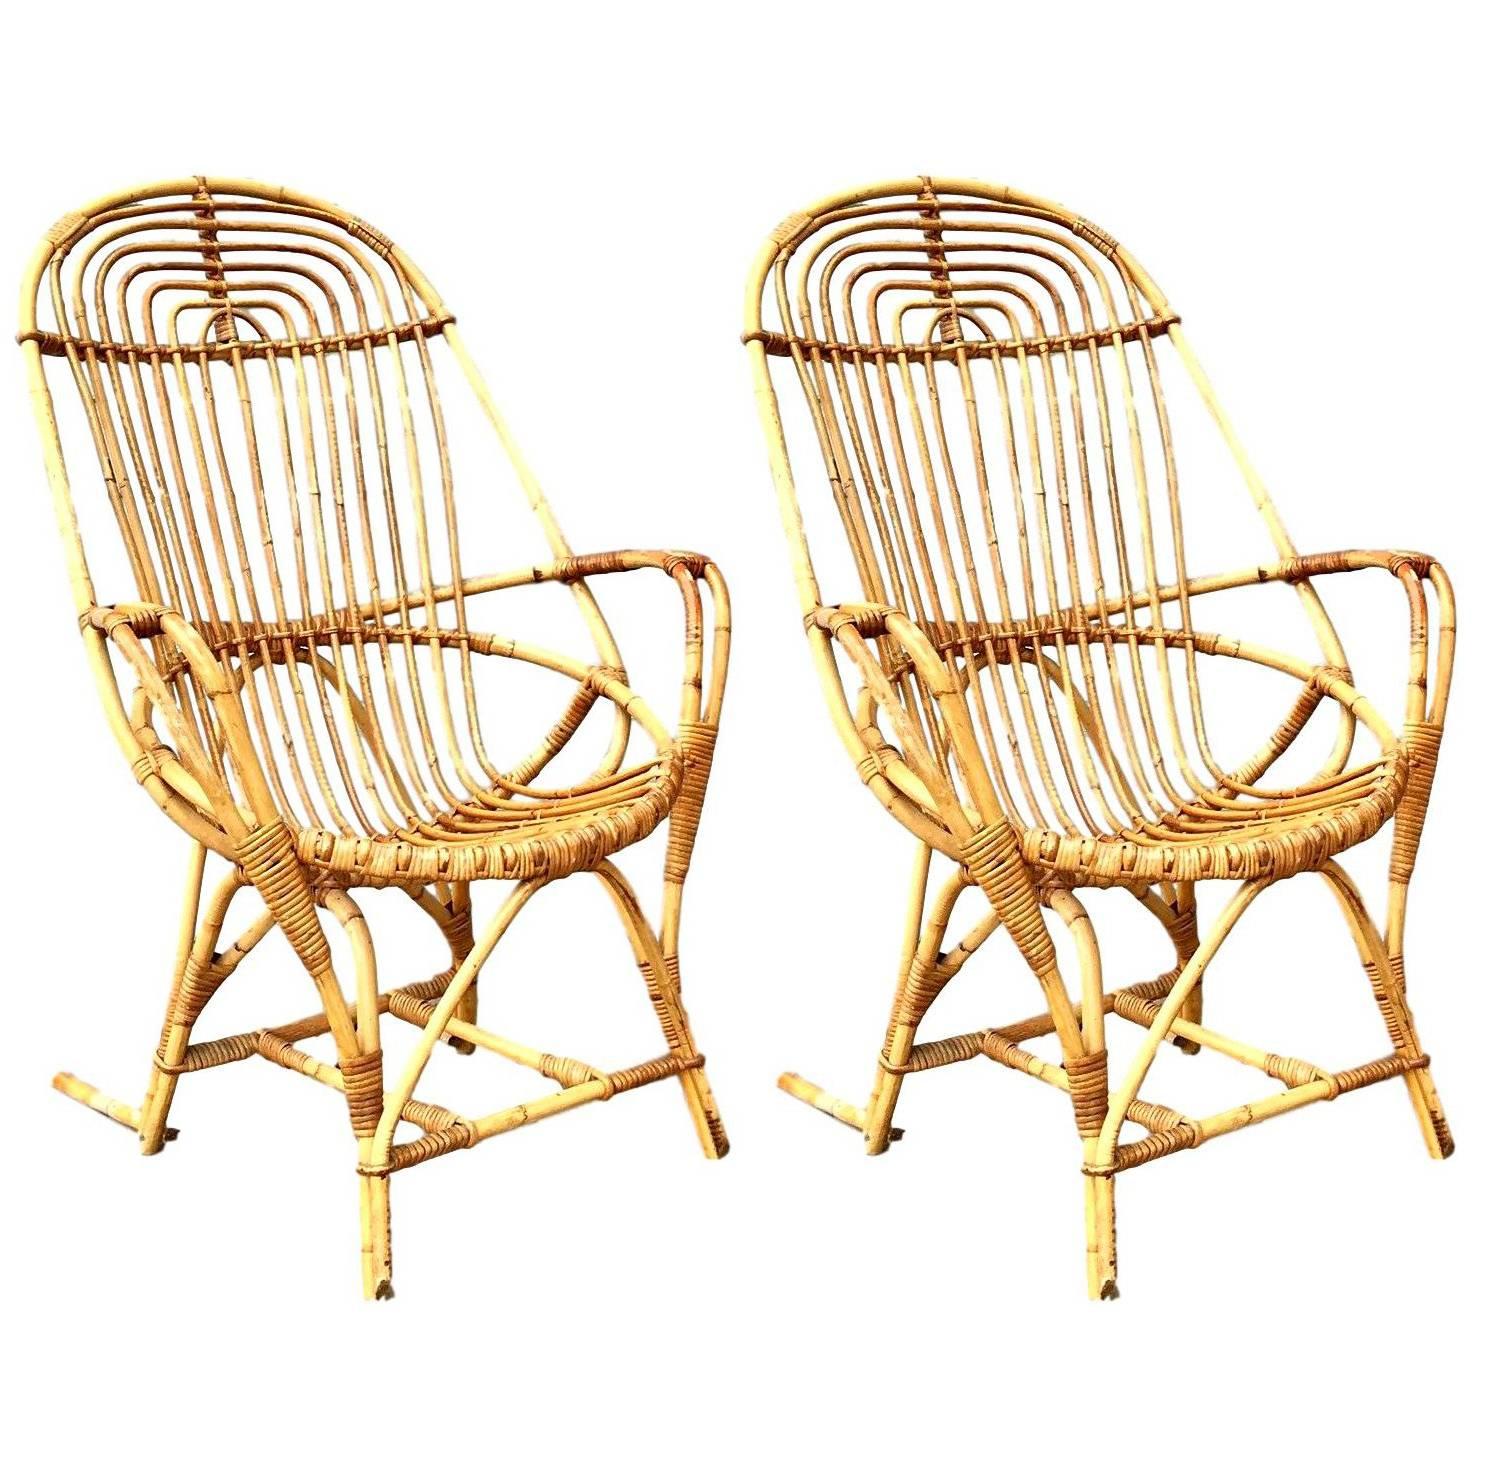 Pair of French Sculptural Rattan Chairs